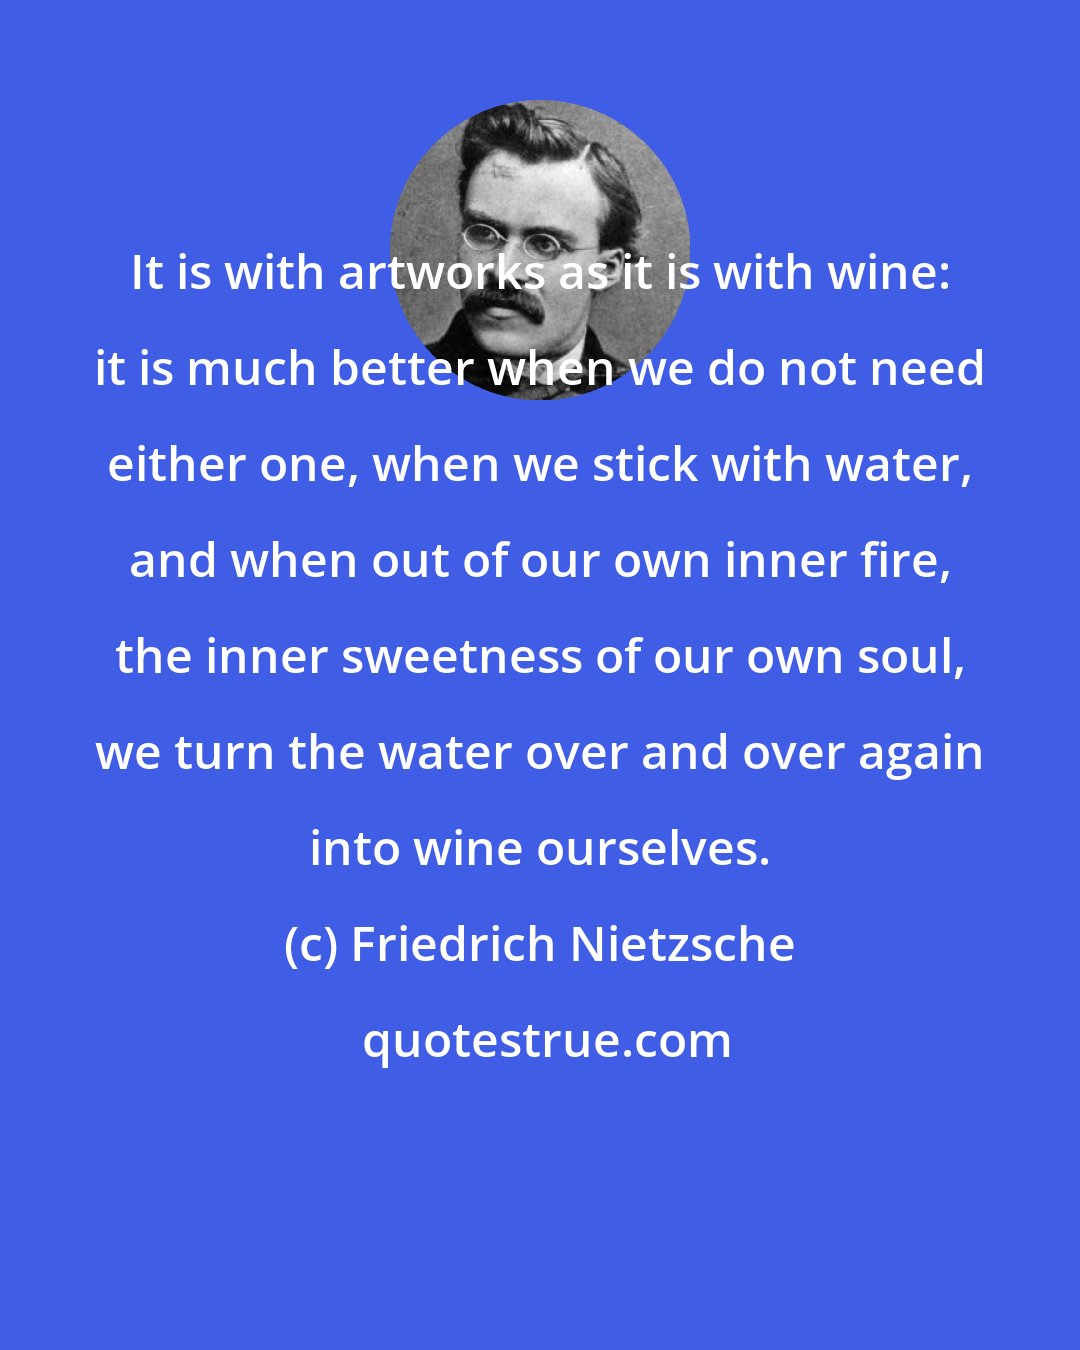 Friedrich Nietzsche: It is with artworks as it is with wine: it is much better when we do not need either one, when we stick with water, and when out of our own inner fire, the inner sweetness of our own soul, we turn the water over and over again into wine ourselves.